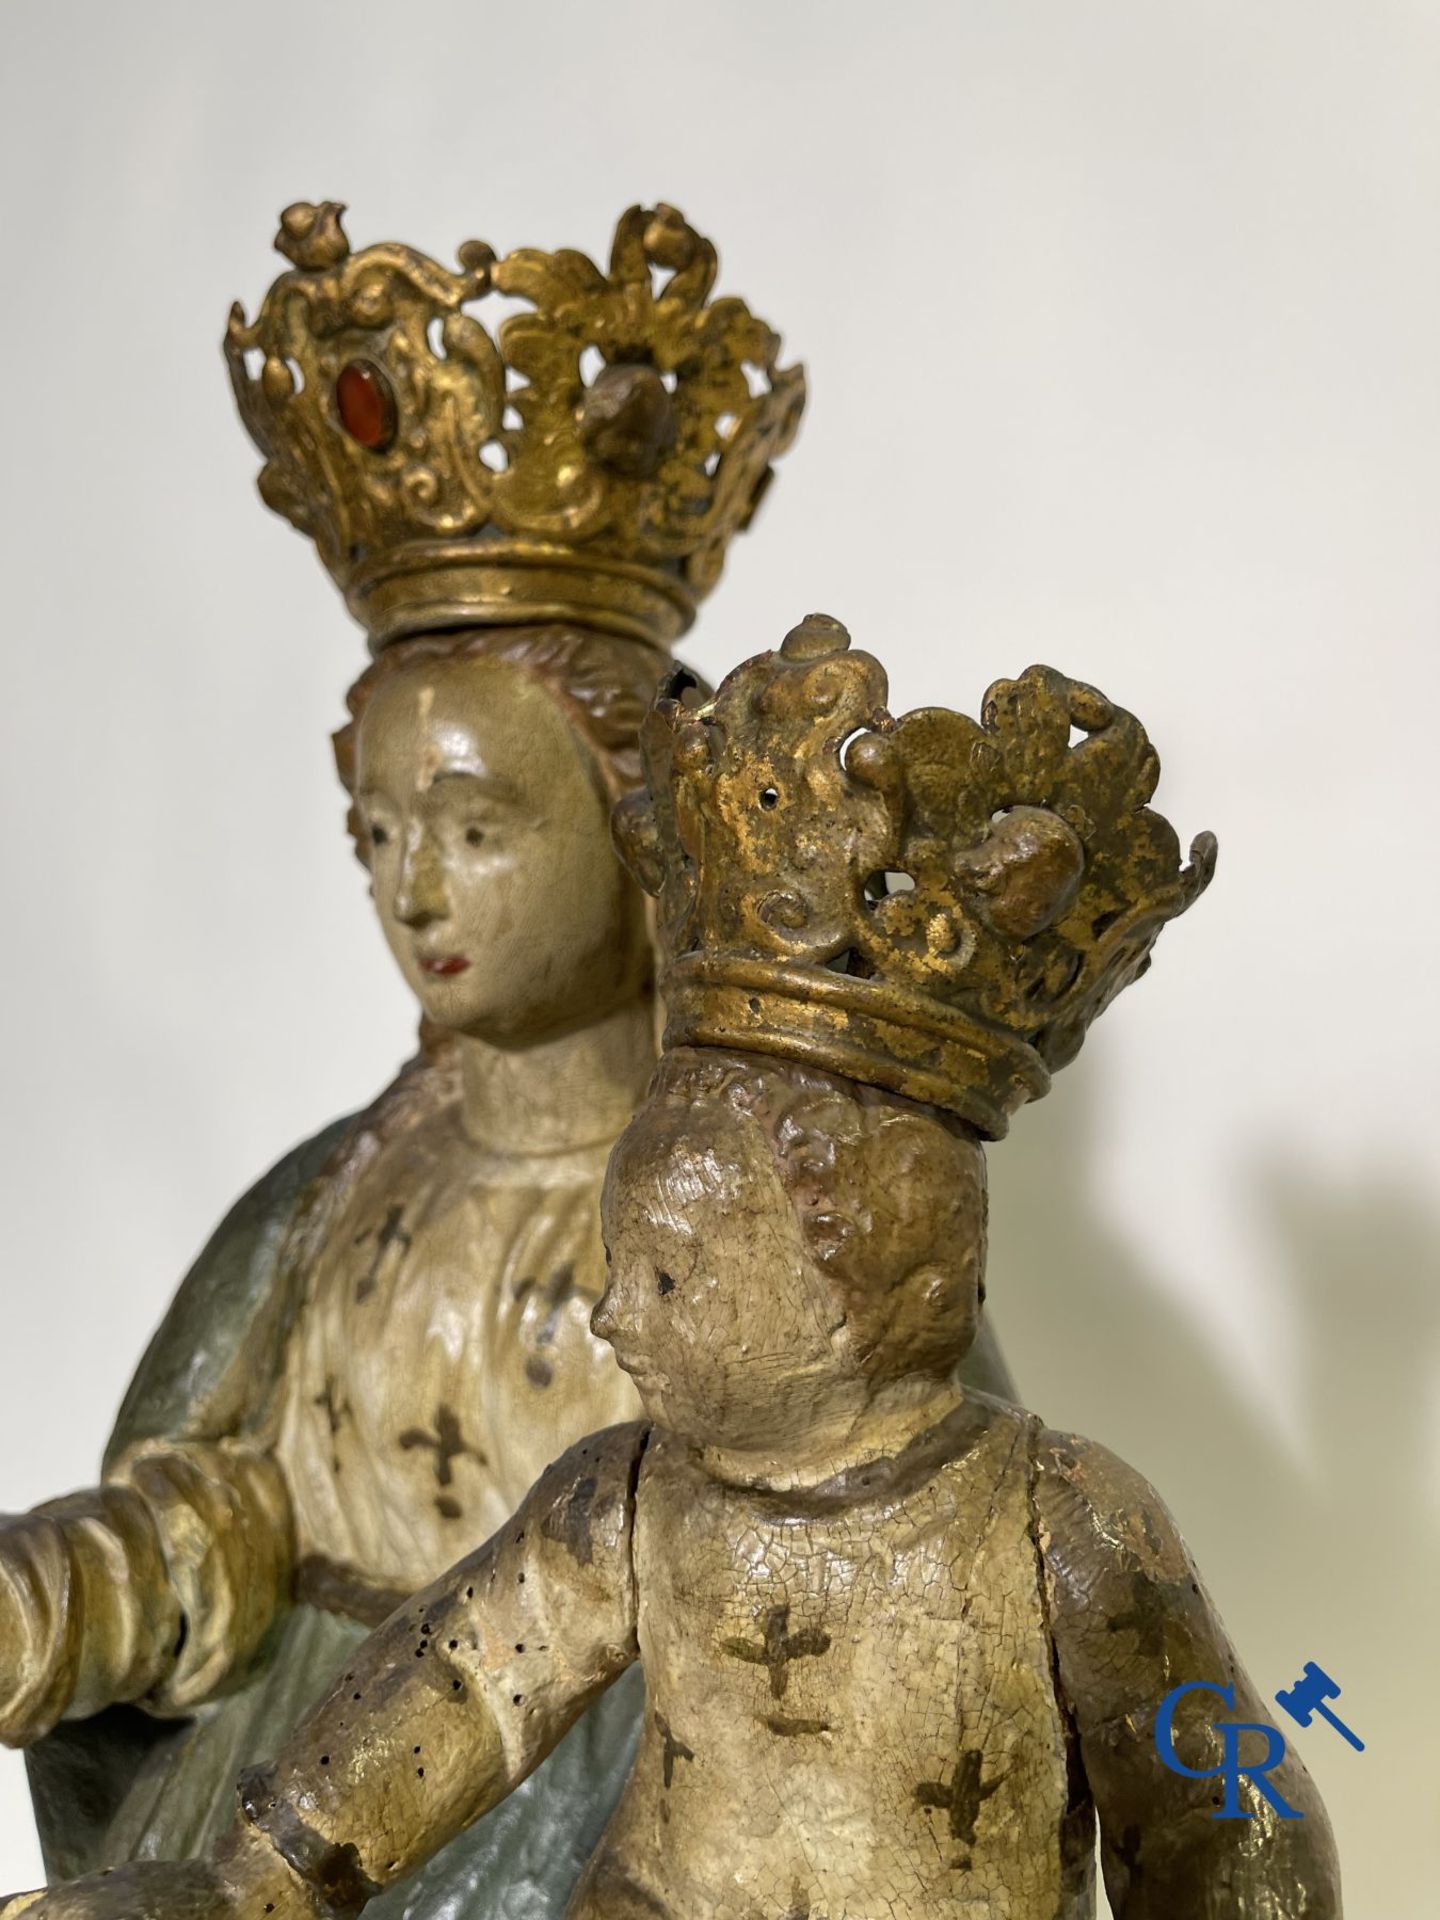 Wooden polychrome Baroque sculpture of Mary with child. The Crown inlaid with an amber-like rock. - Image 6 of 30